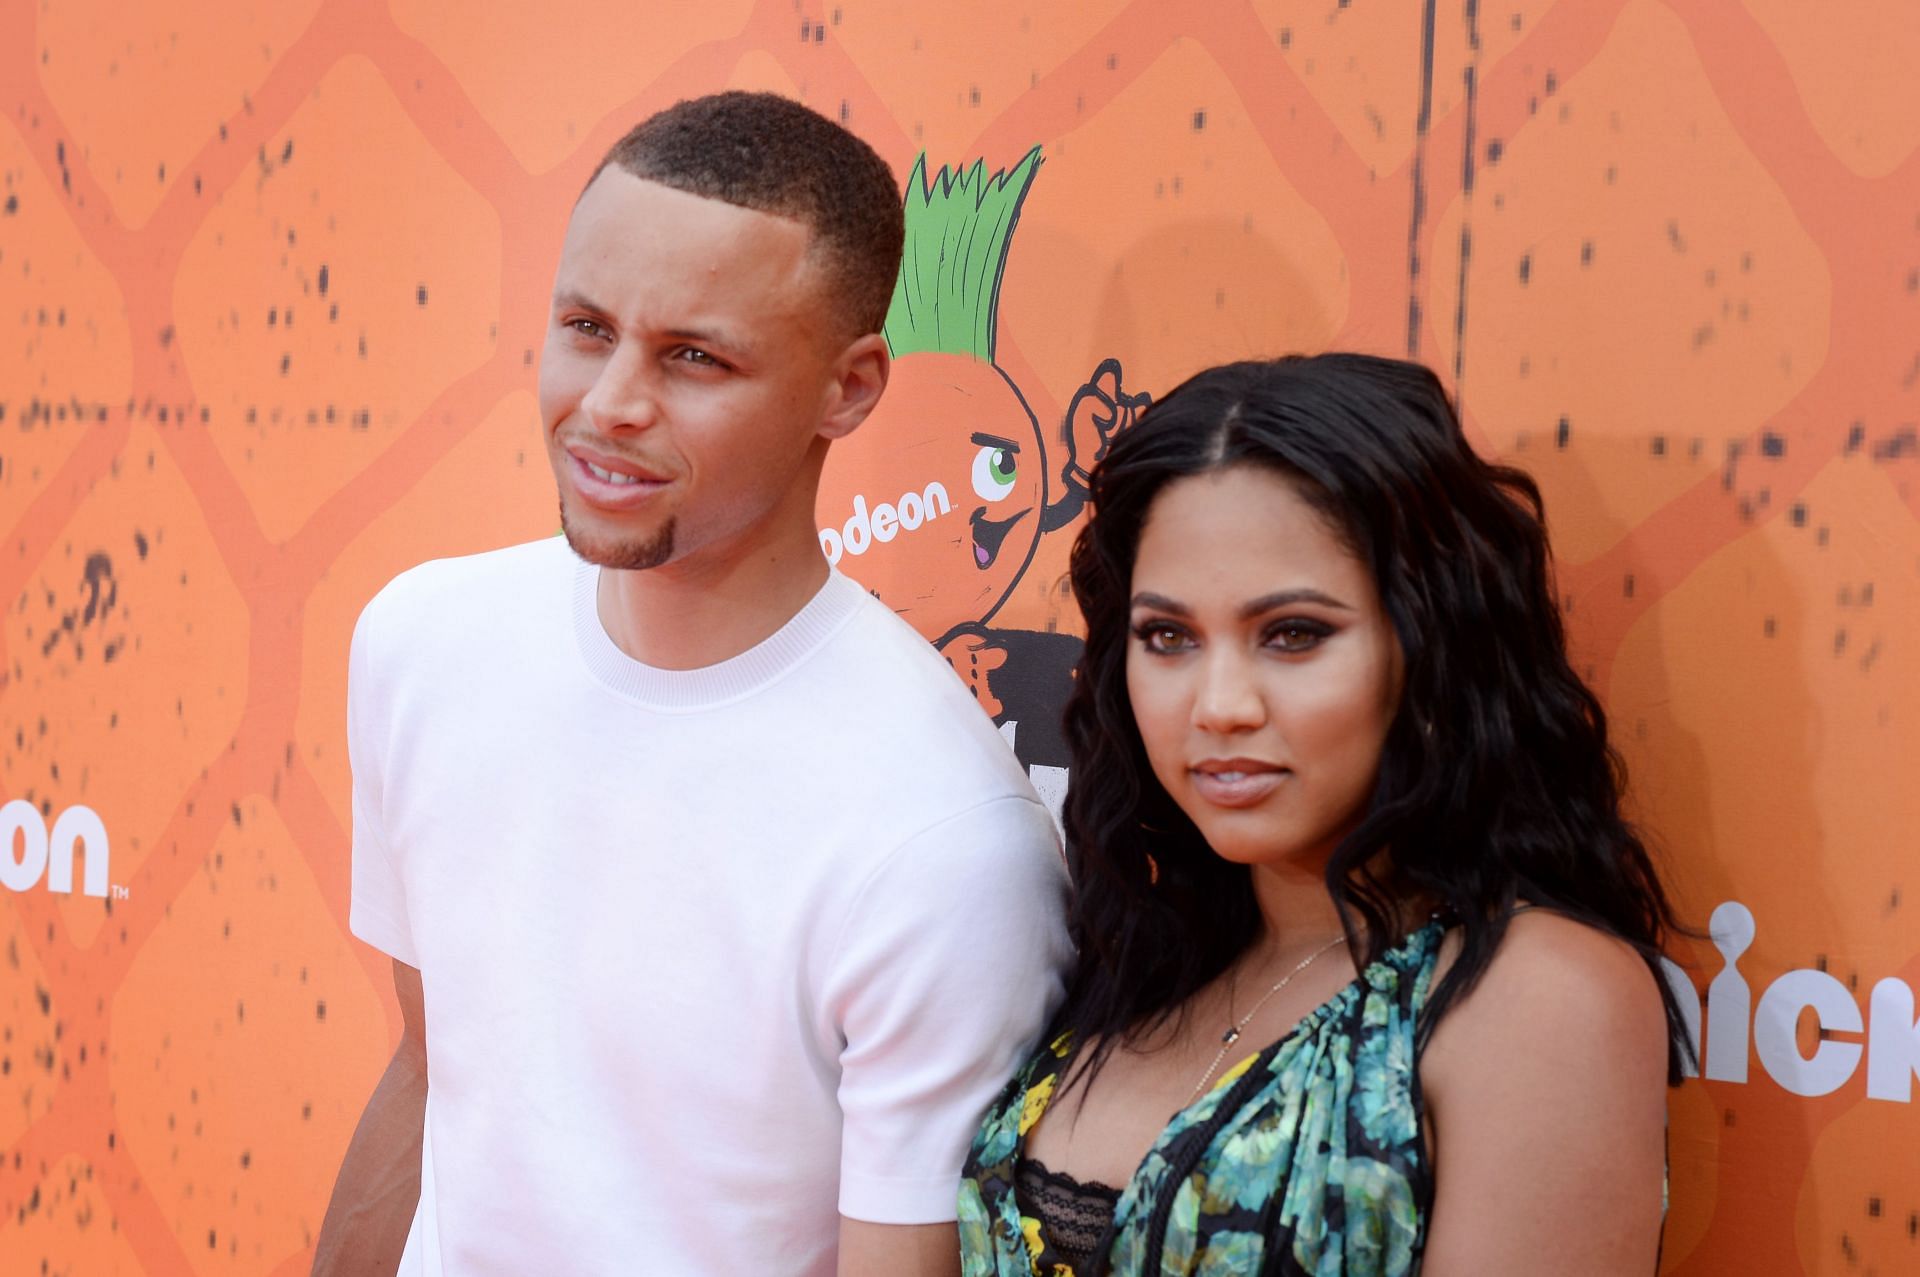 Steph Curry and Ayesha Curry at an event in 2016.